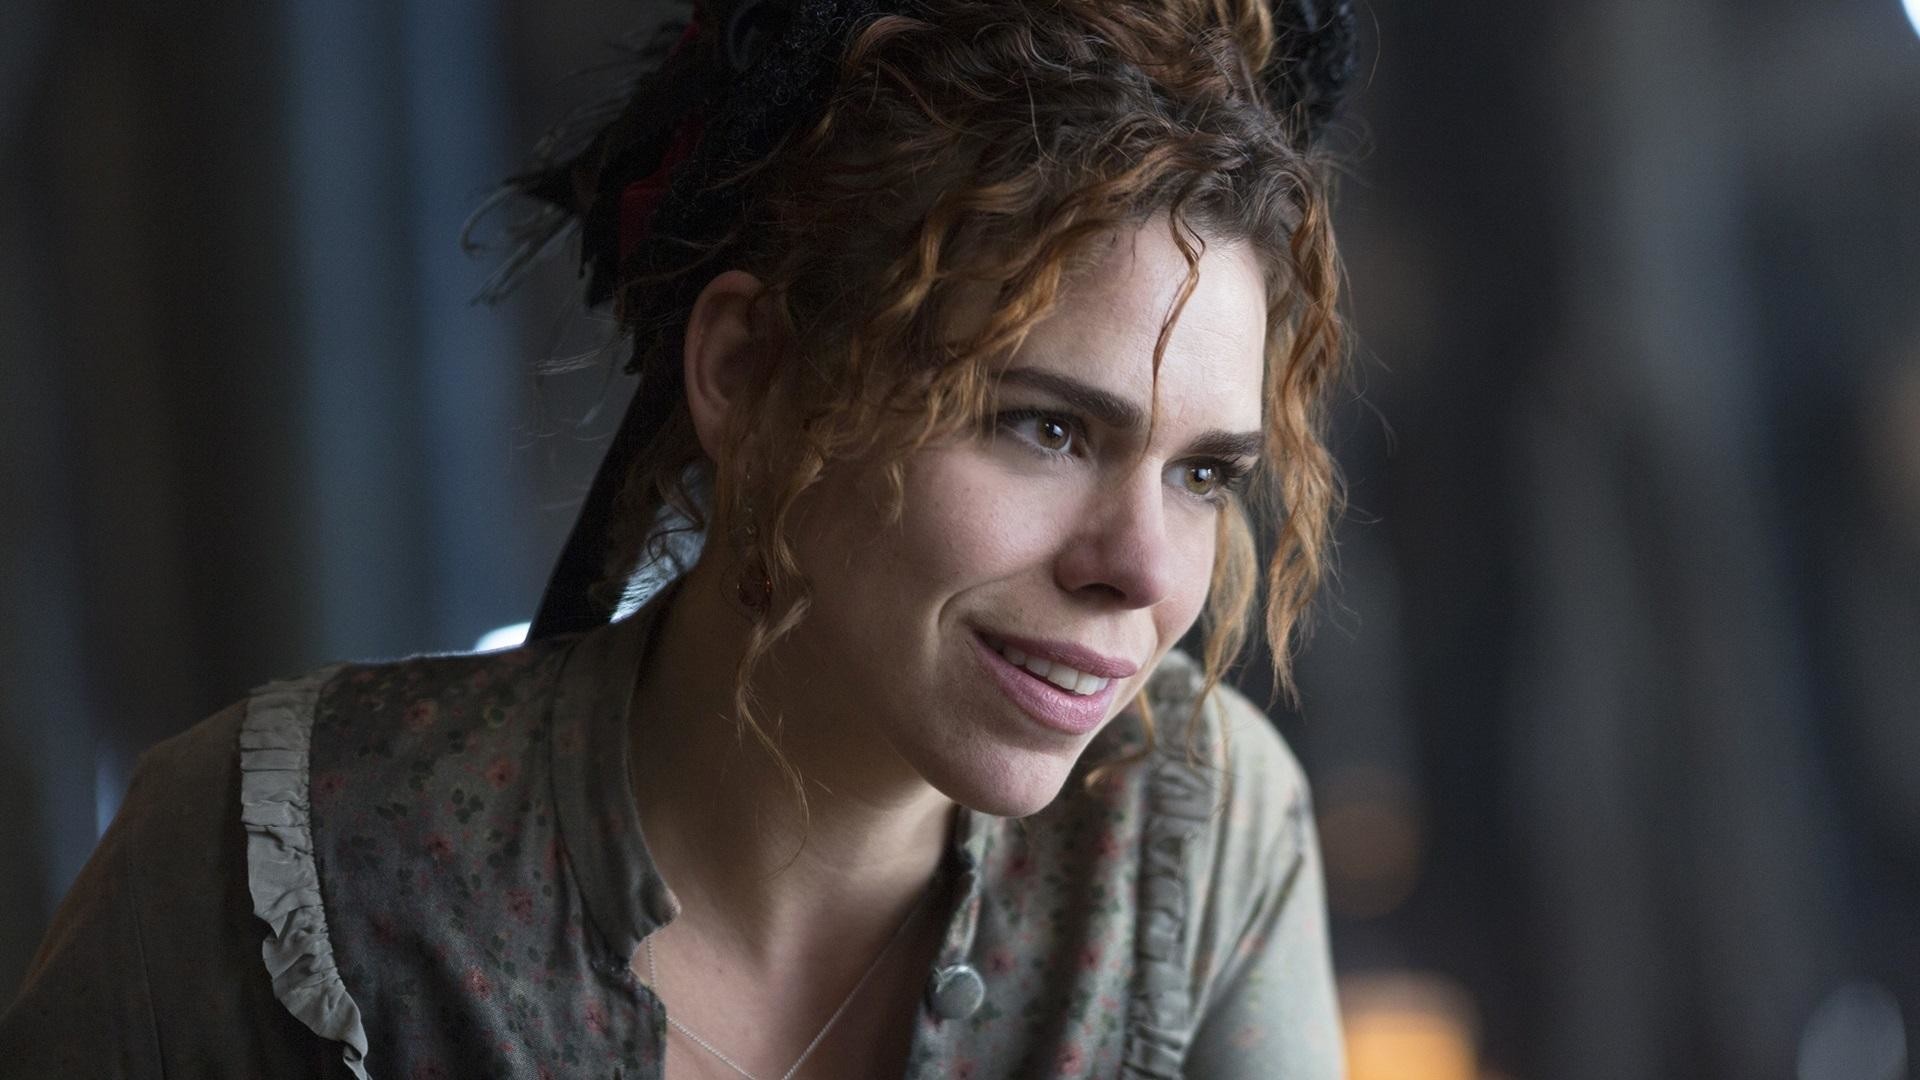 01 - 05 - 16 - Penny Dreadful Wallpapers, Px - Billie Piper Doctor Who 2017 , HD Wallpaper & Backgrounds